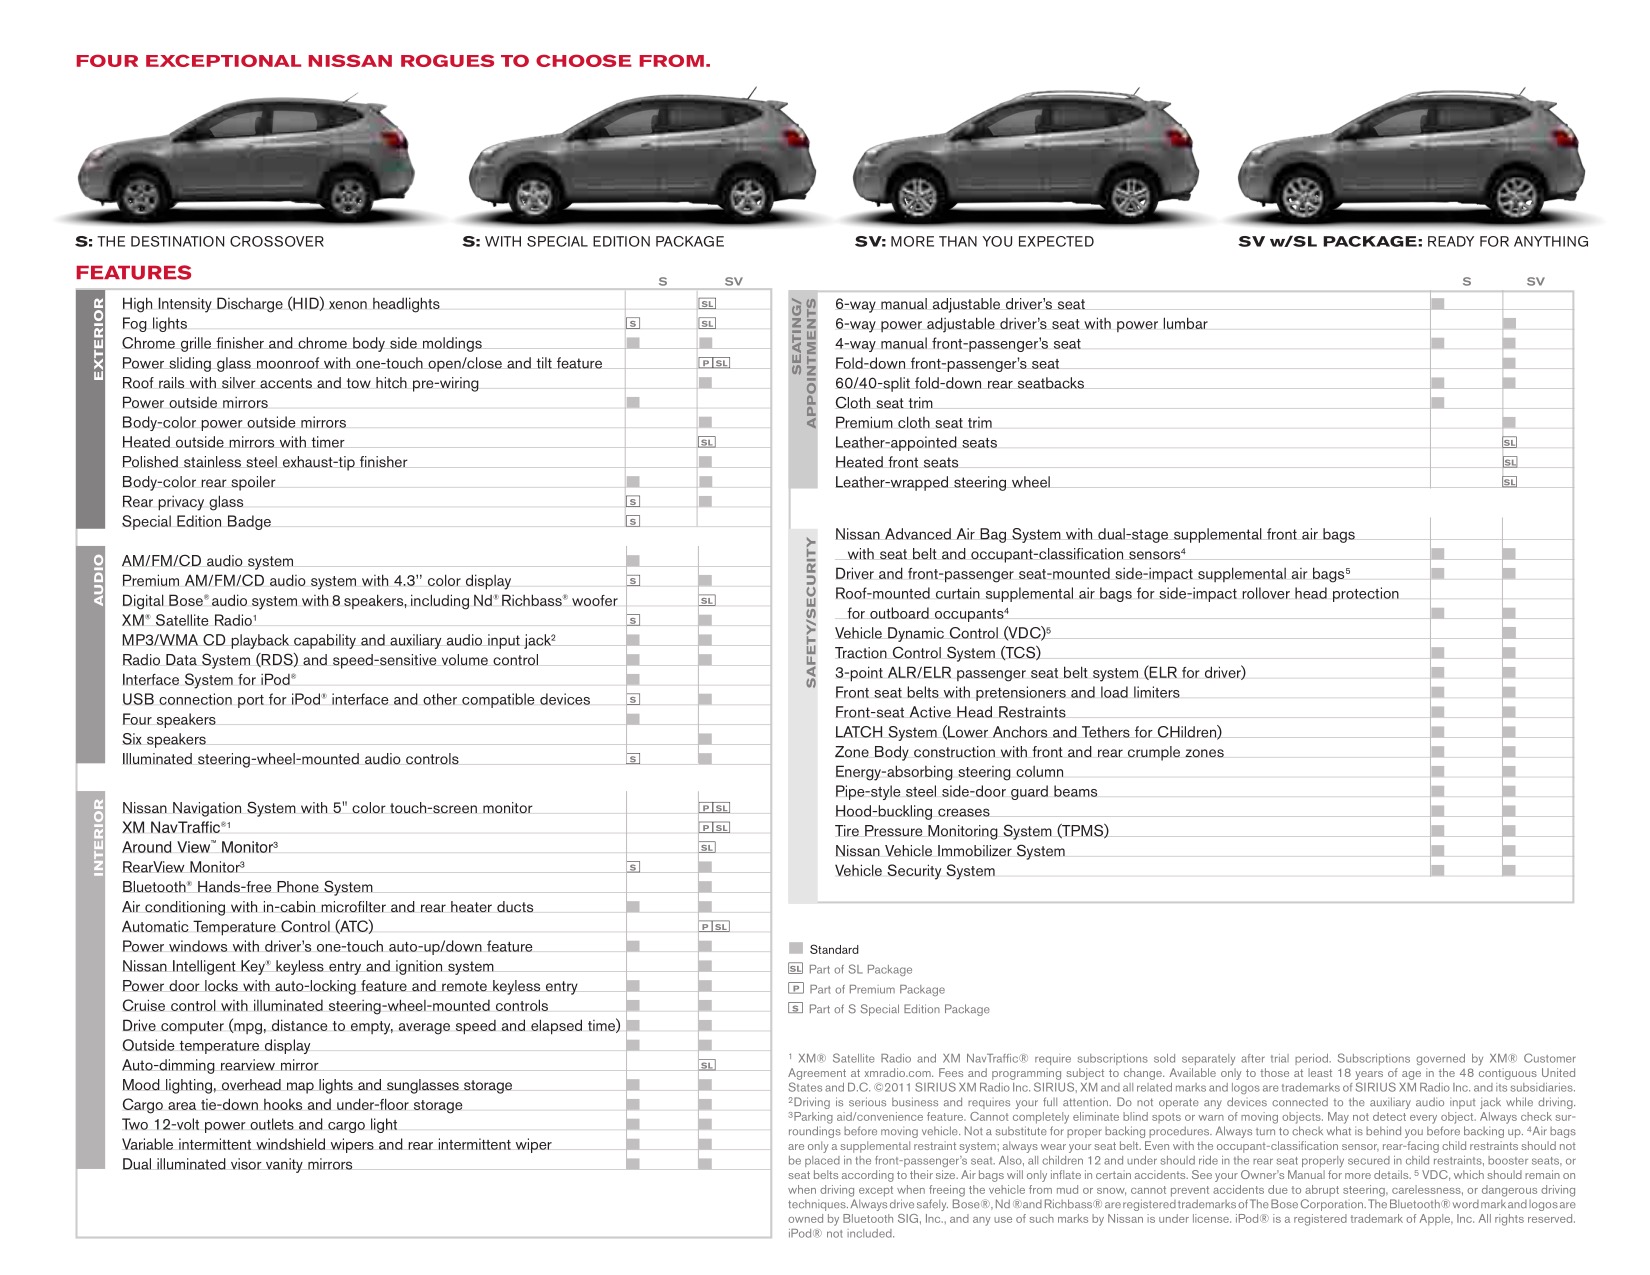 2012 Nissan Rogue Brochure Page 3